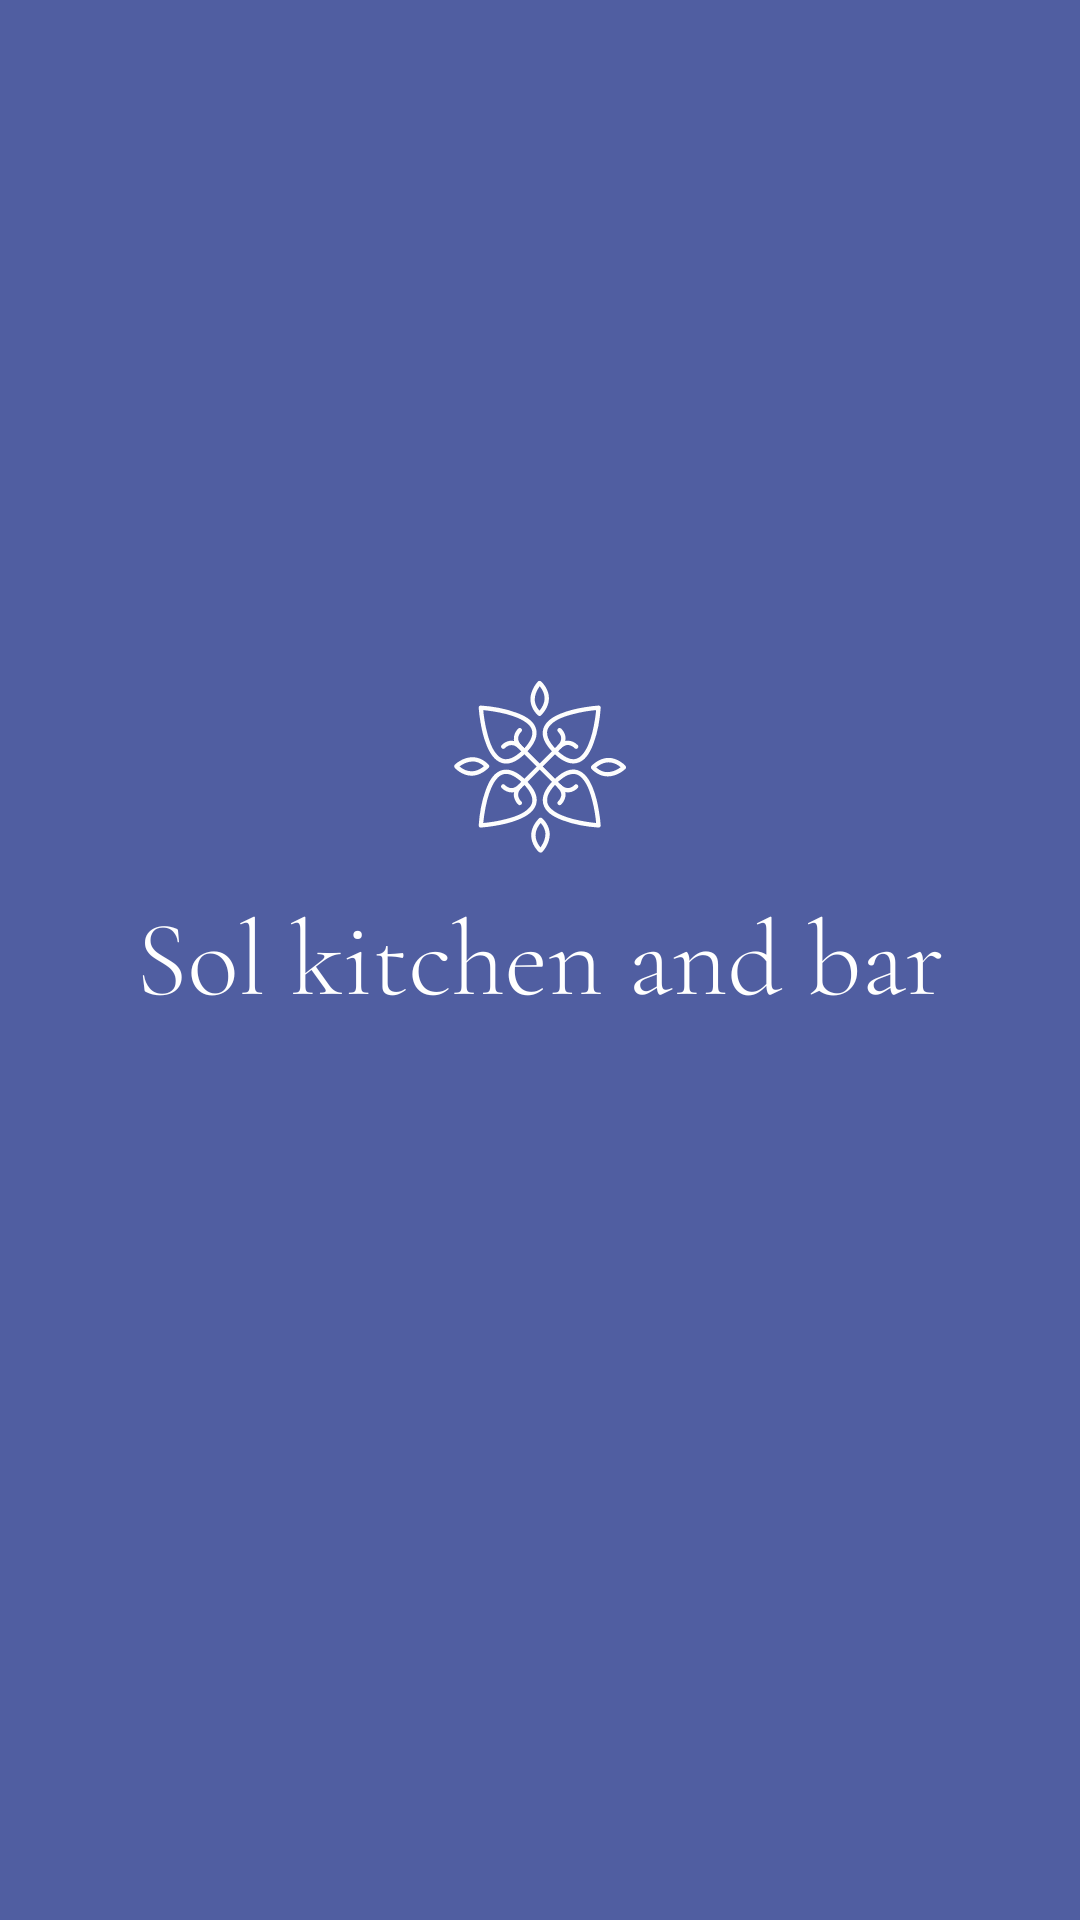 Sol kitchen and bar